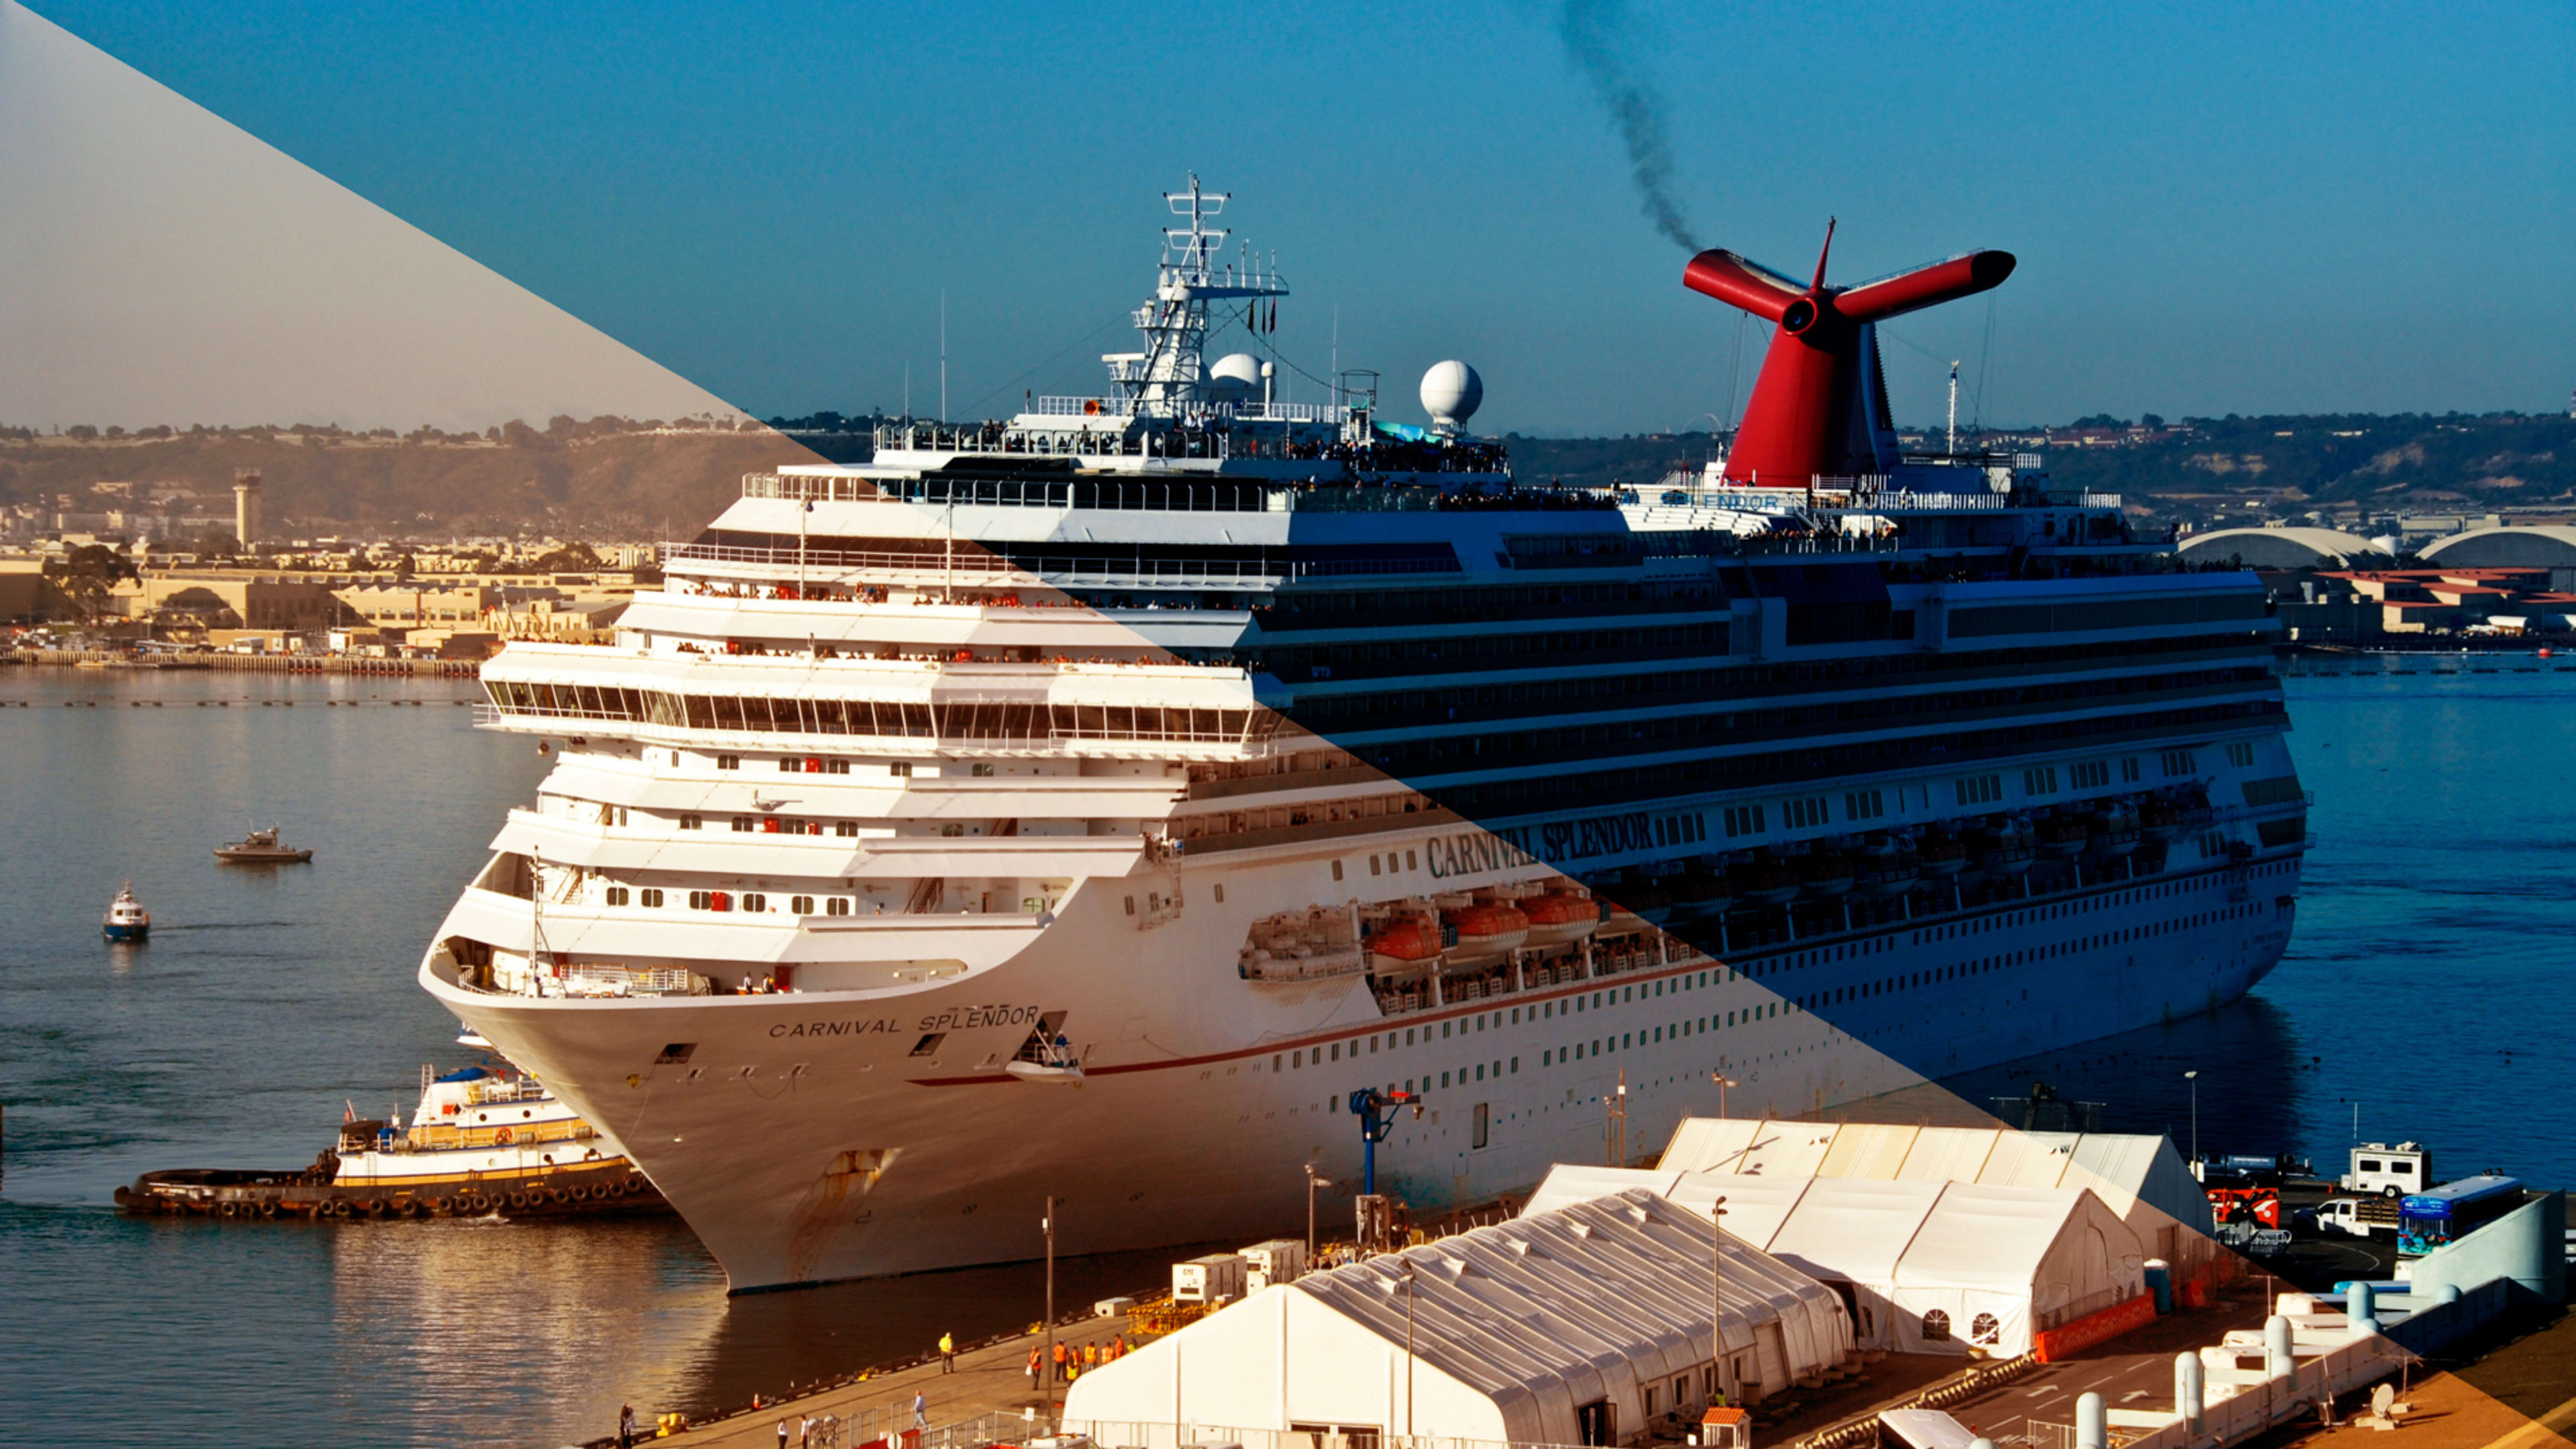 Carnival’s cruise ships pollute more than all of Europe’s cars: Study